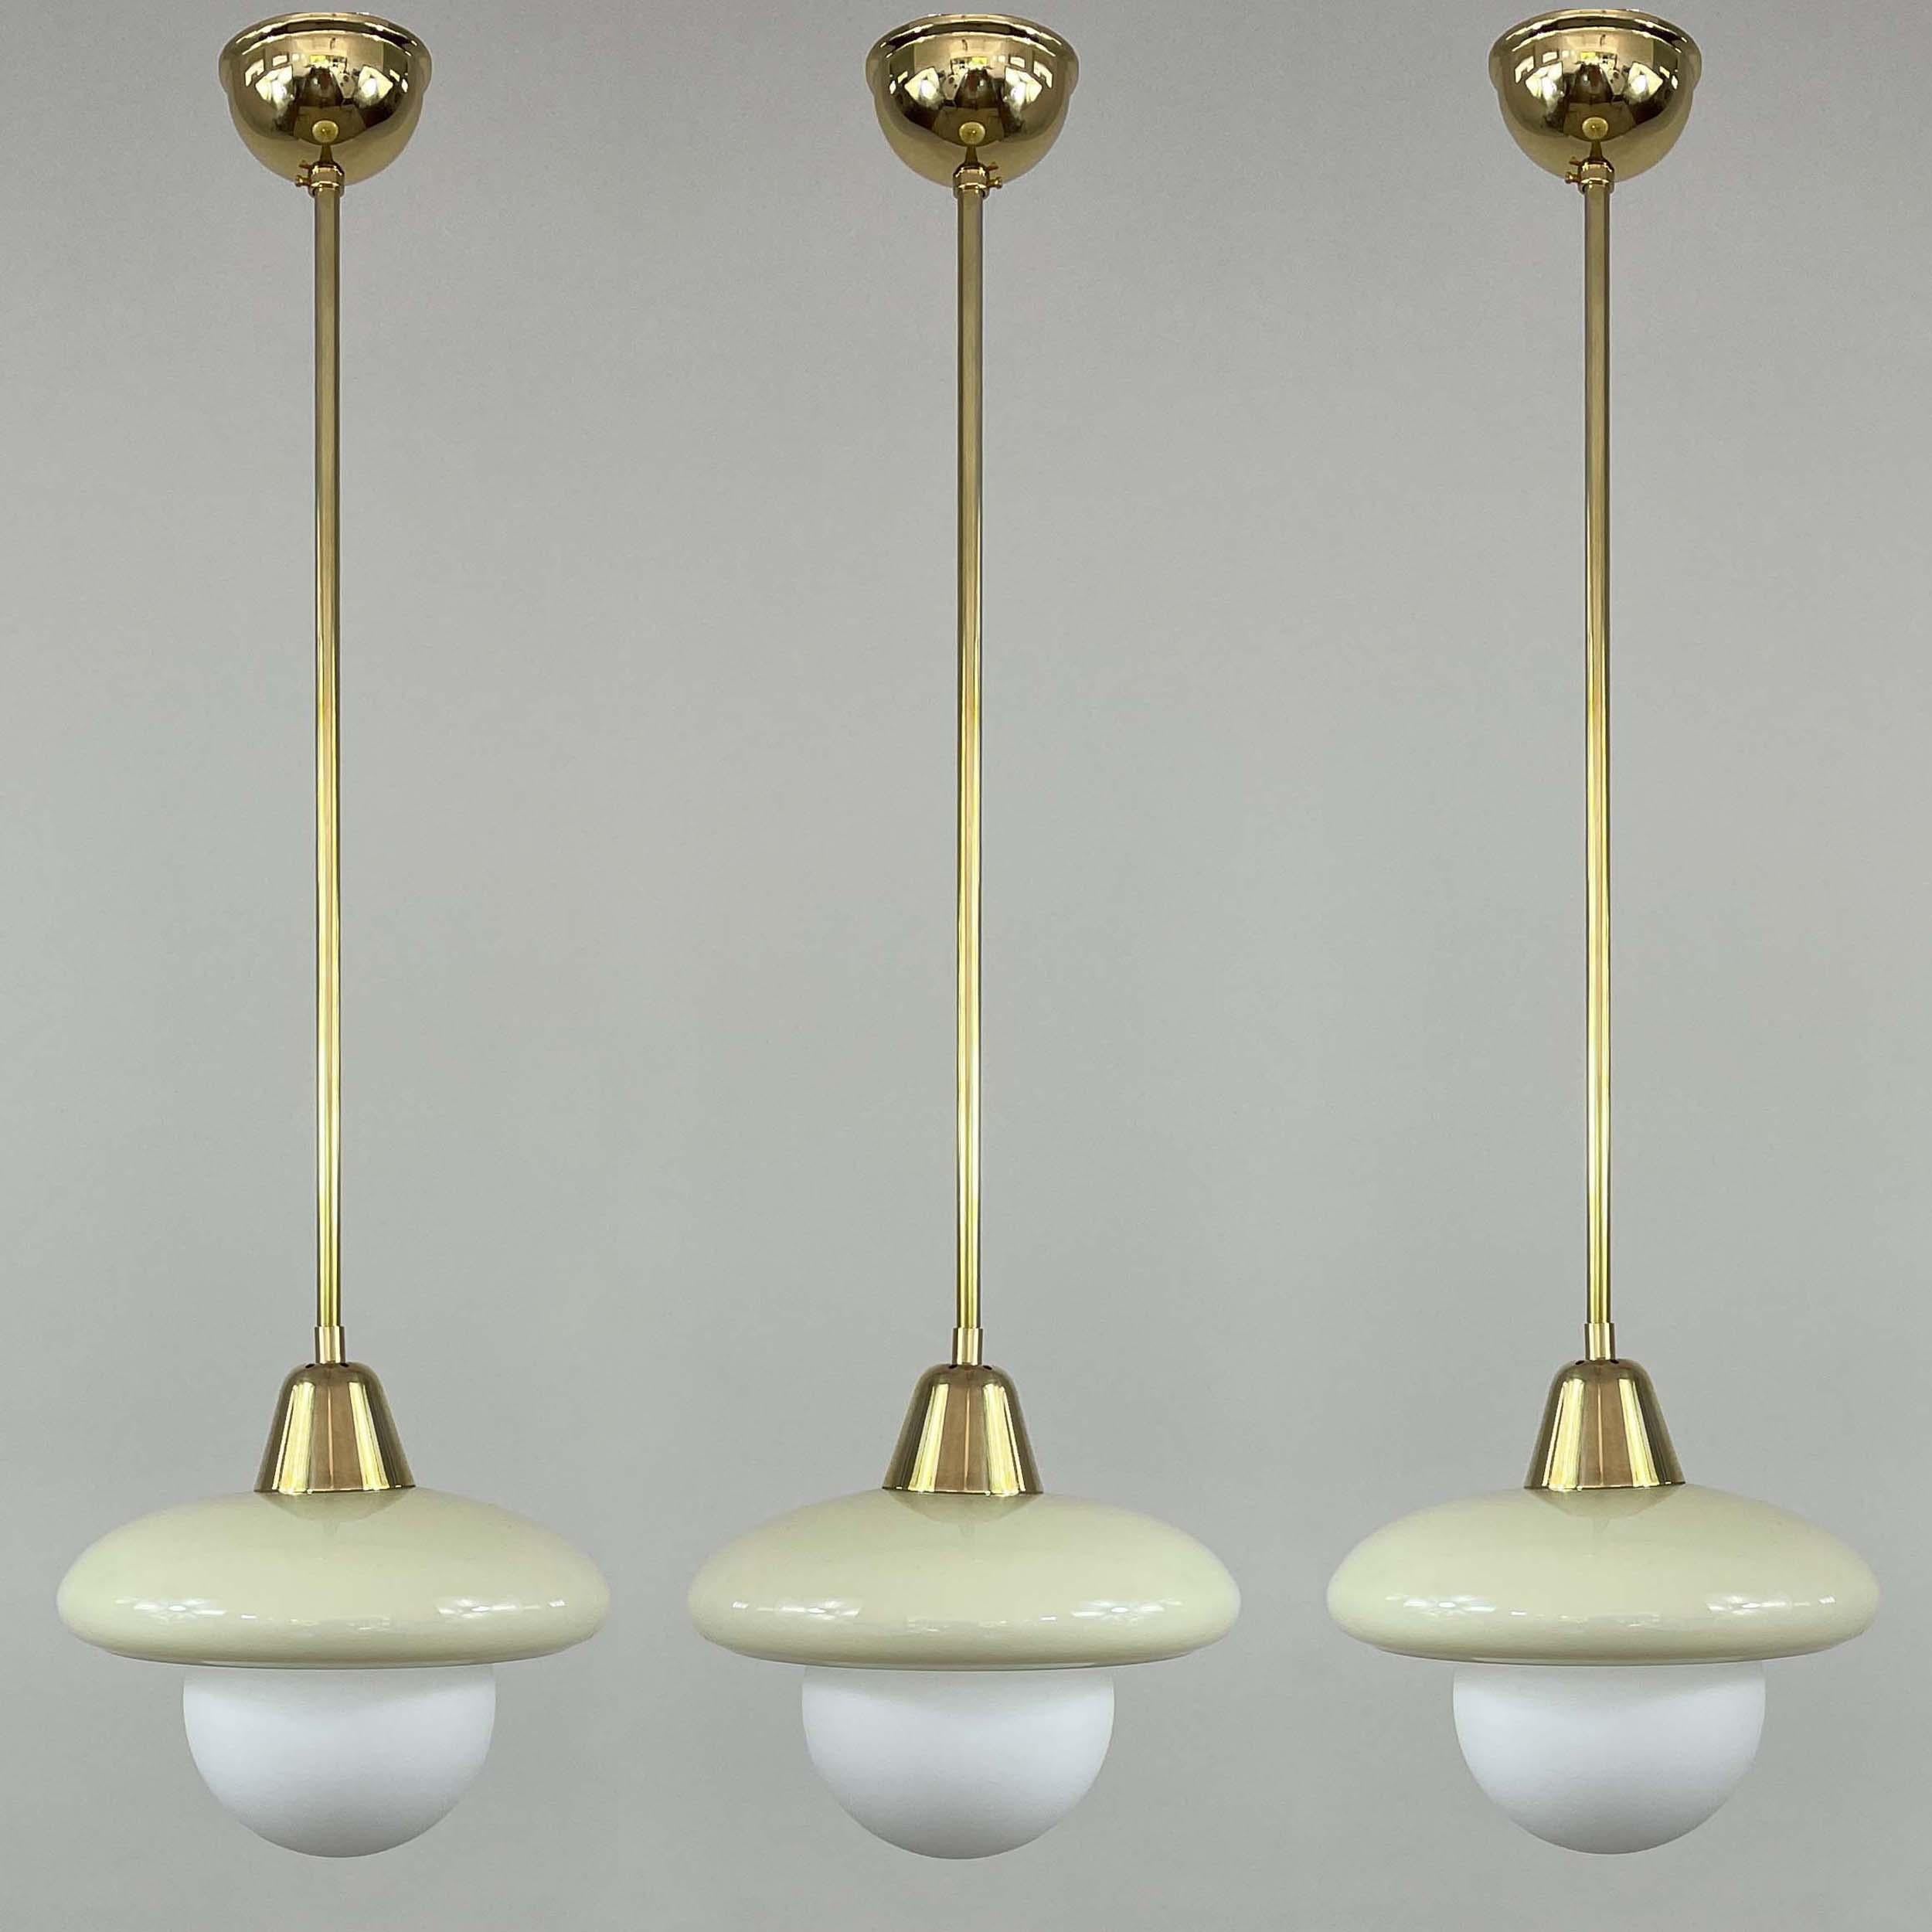 This elegant minimalist Art Deco pendant was designed and manufactured in Germany in the 1920s to 1930s during the Bauhaus period. 

The light features a round cream colored opaline lampshade and brass hardware. It requires one E27 bulb and has been